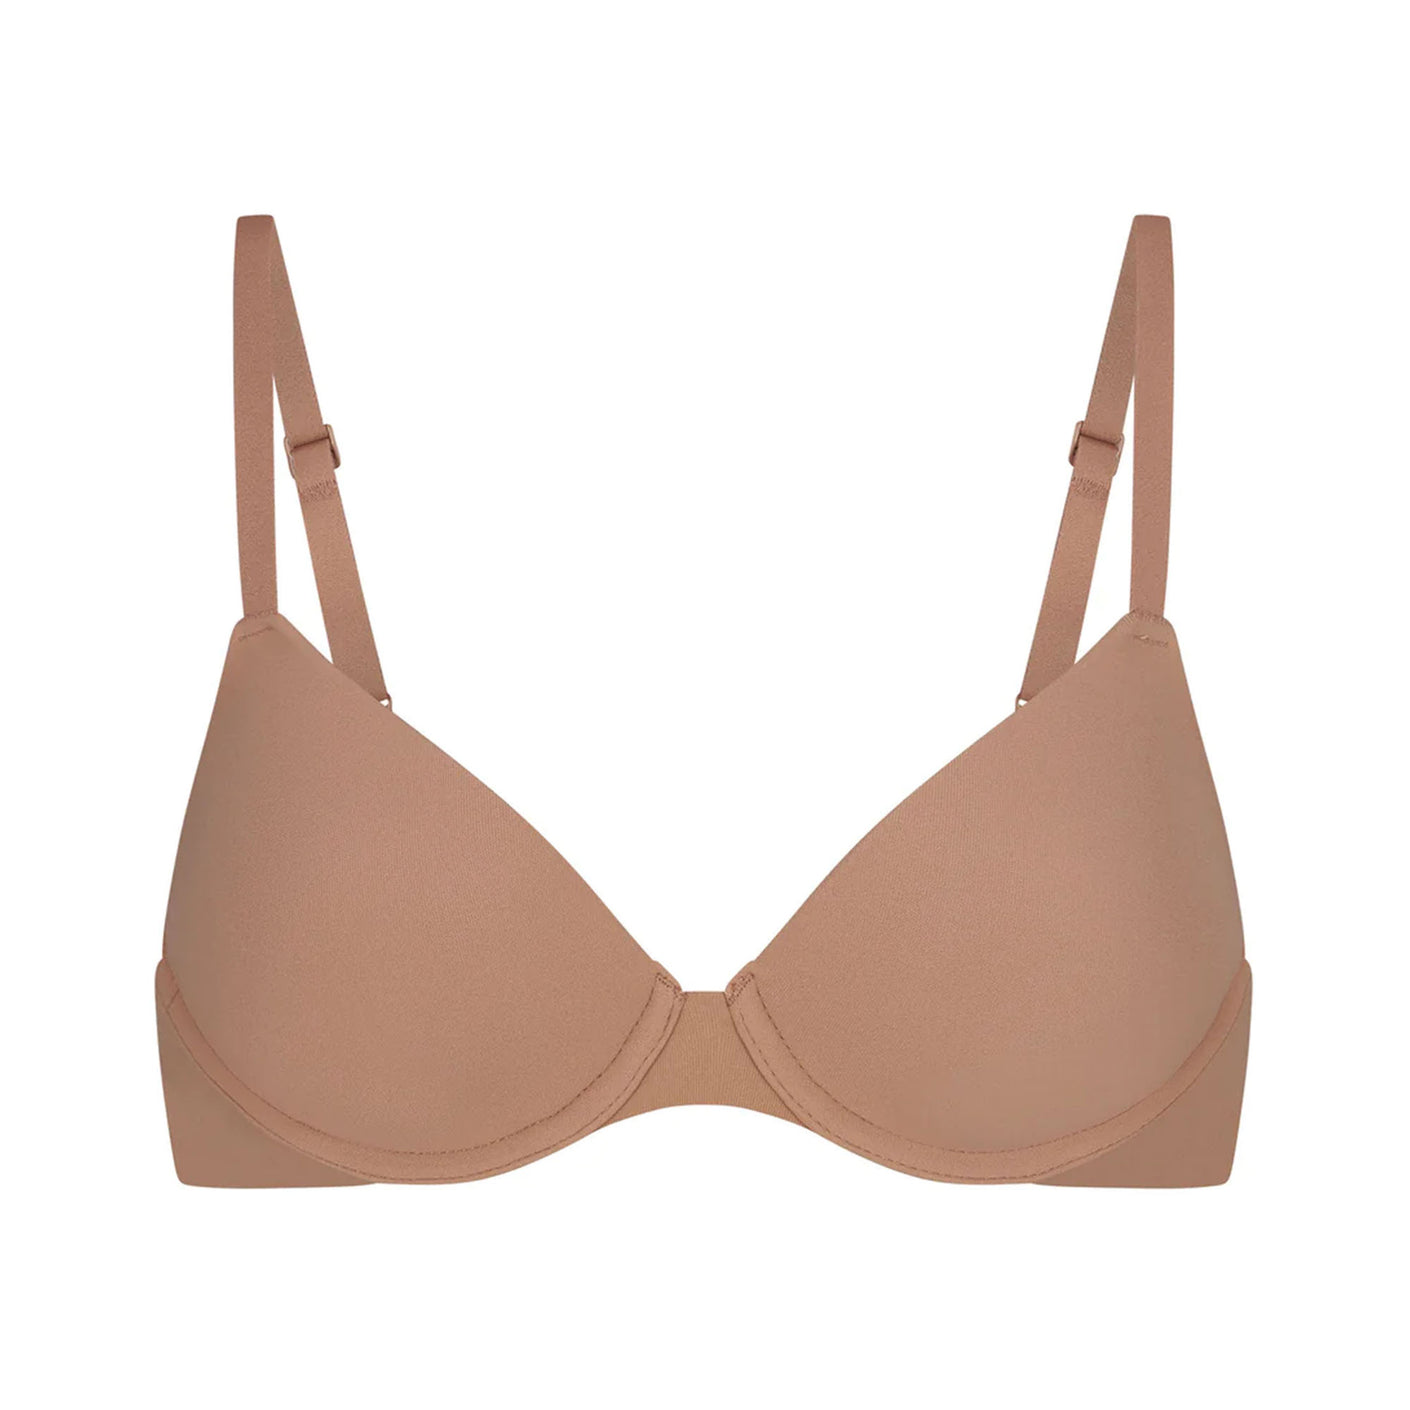 I'm usually a 36DDD and I am wearing the 38DD in the Ultimate Bra. The, SKIMS